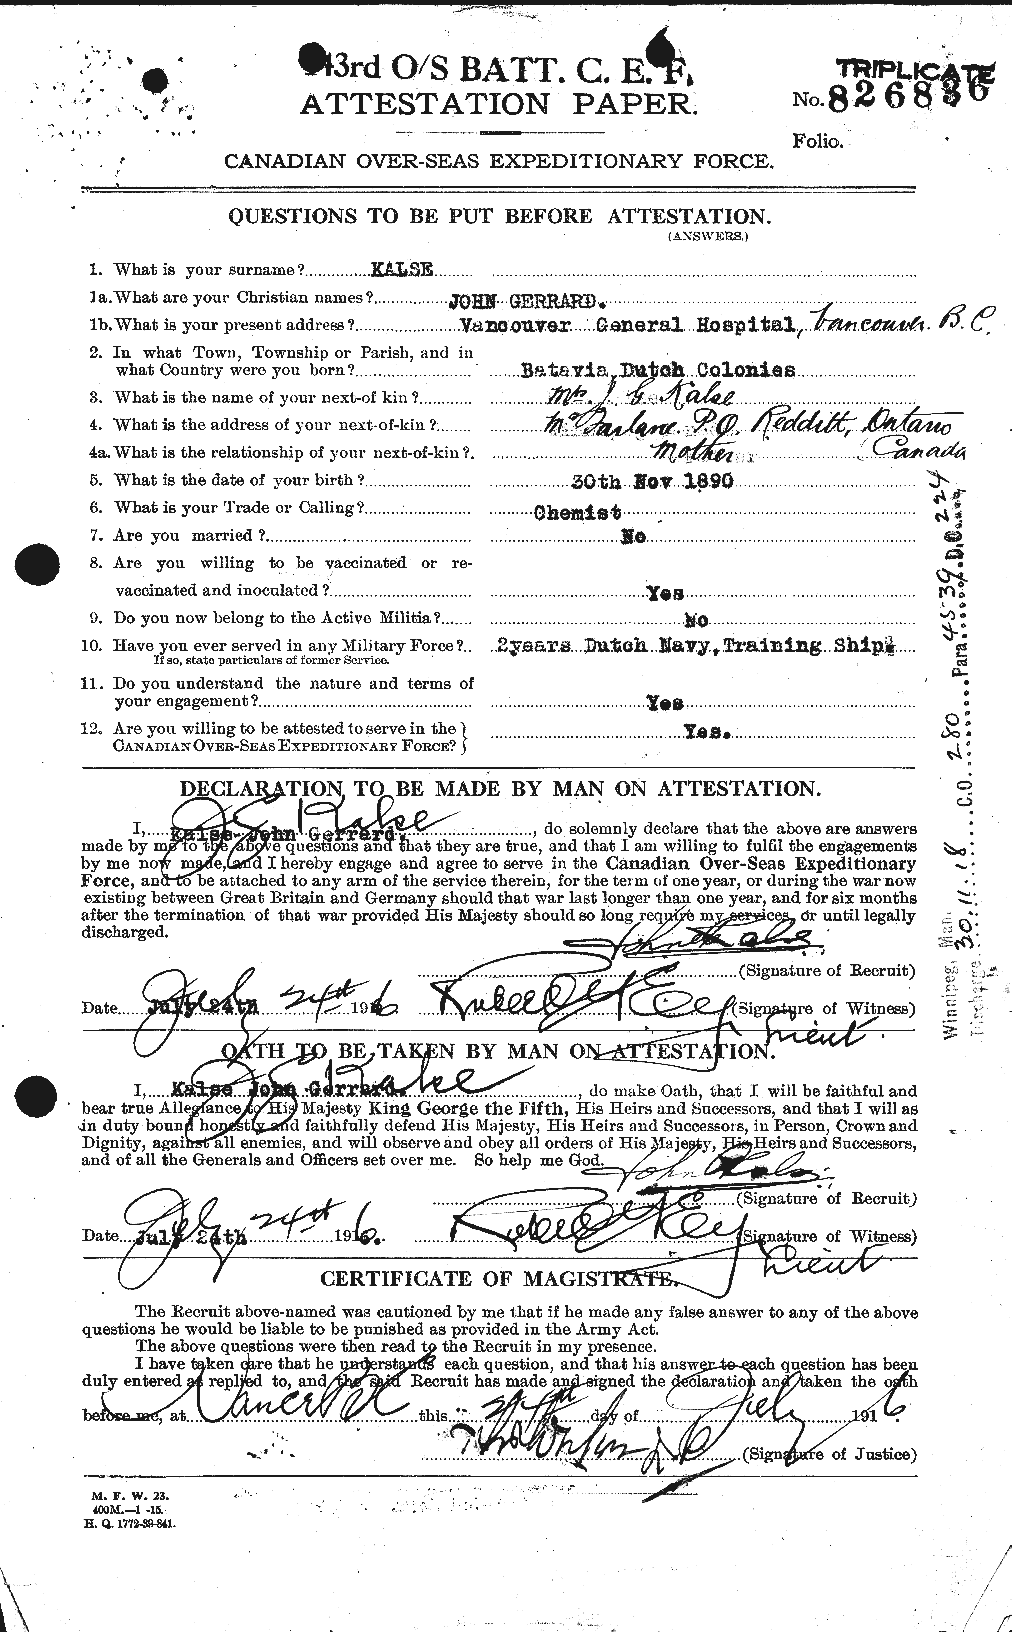 Personnel Records of the First World War - CEF 428343a